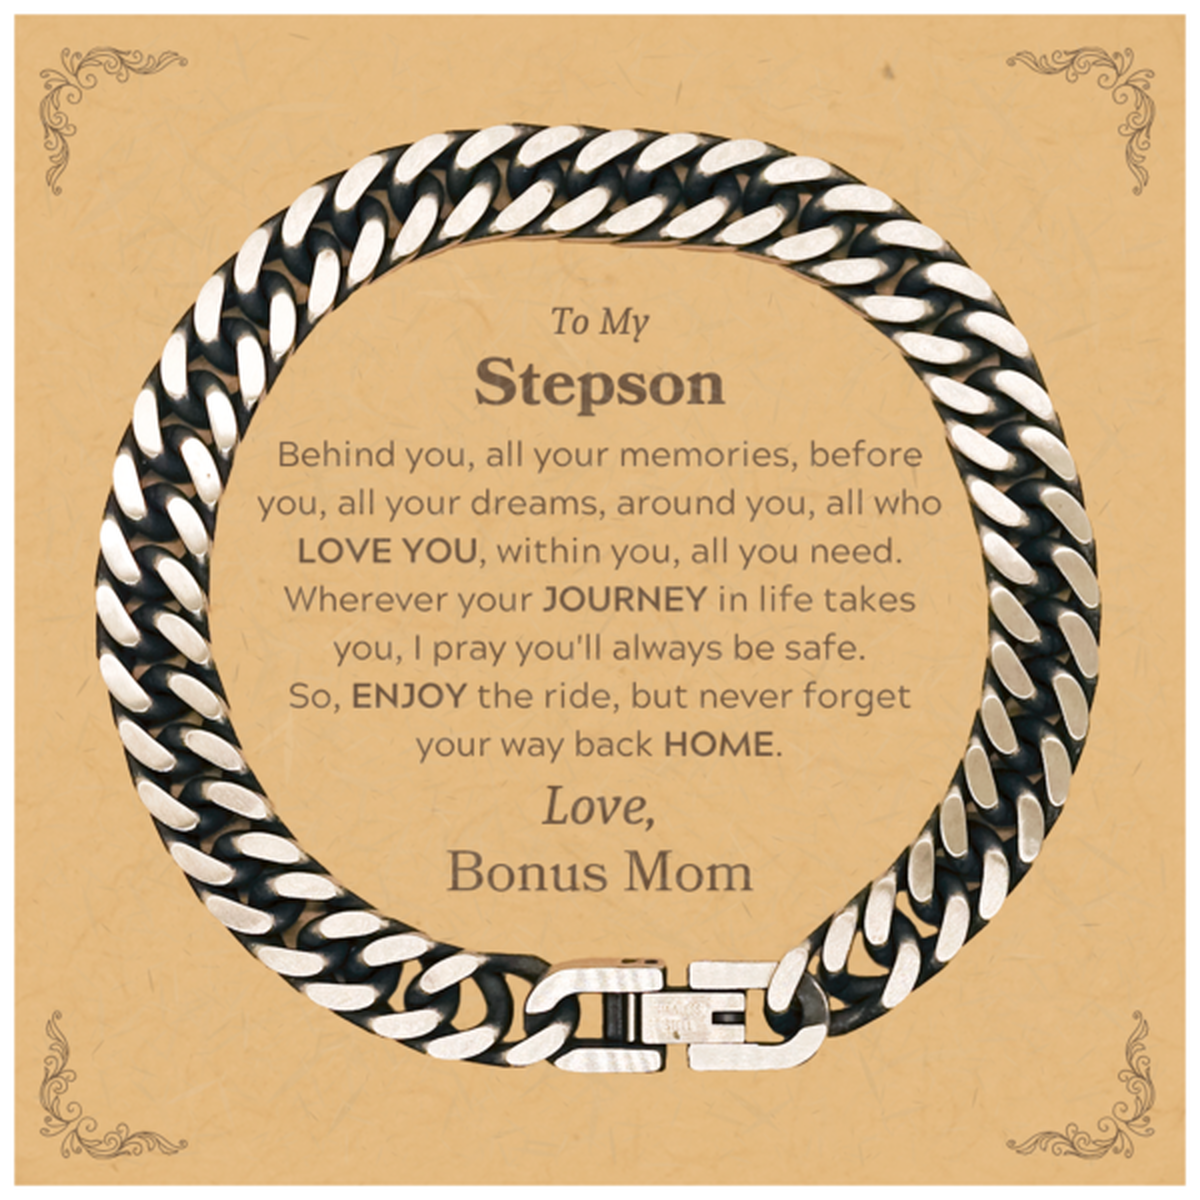 To My Stepson Graduation Gifts from Bonus Mom, Stepson Cuban Link Chain Bracelet Christmas Birthday Gifts for Stepson Behind you, all your memories, before you, all your dreams. Love, Bonus Mom